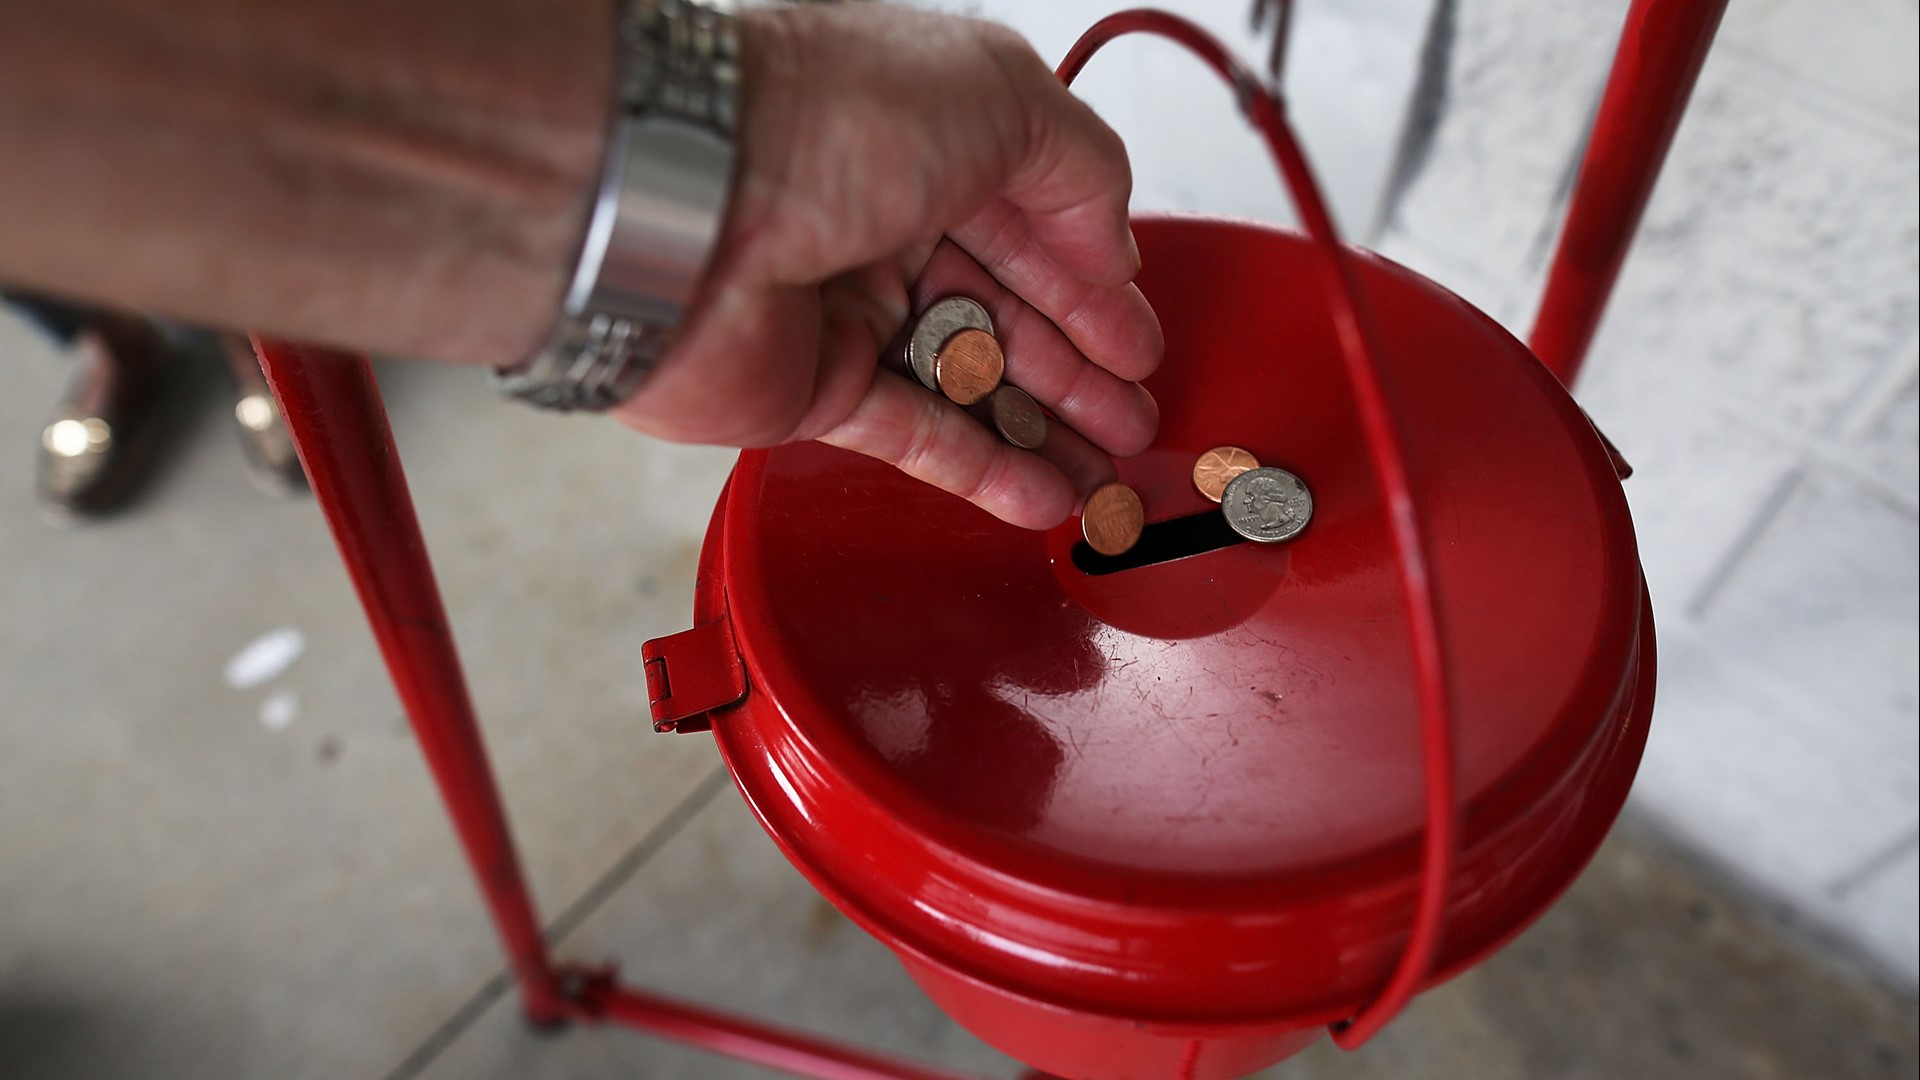 The key to a successful Red Kettle campaign is finding volunteers willing to ring that familiar bell.